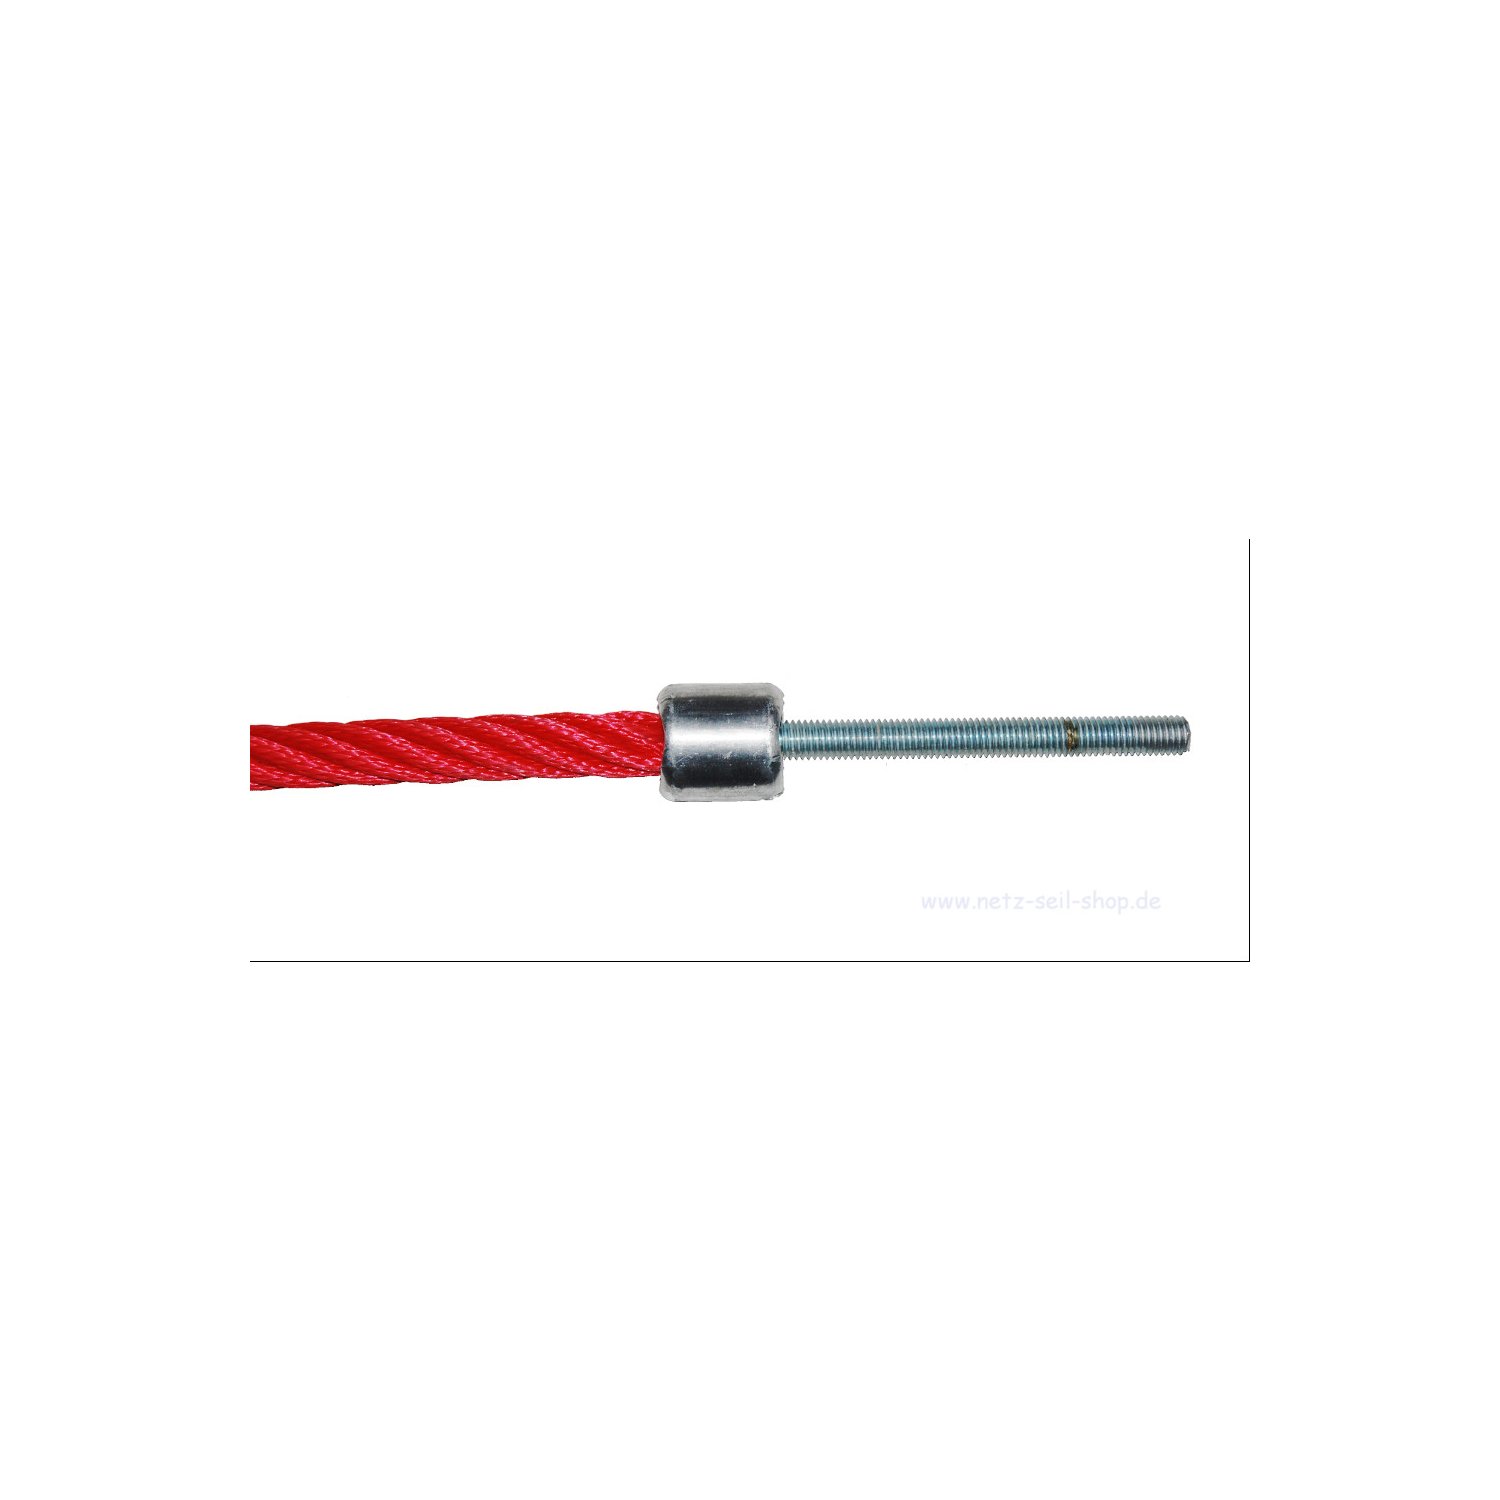 Threaded bolt M12 x 160mm, galvanised, directly pressed [11,30 EUR]